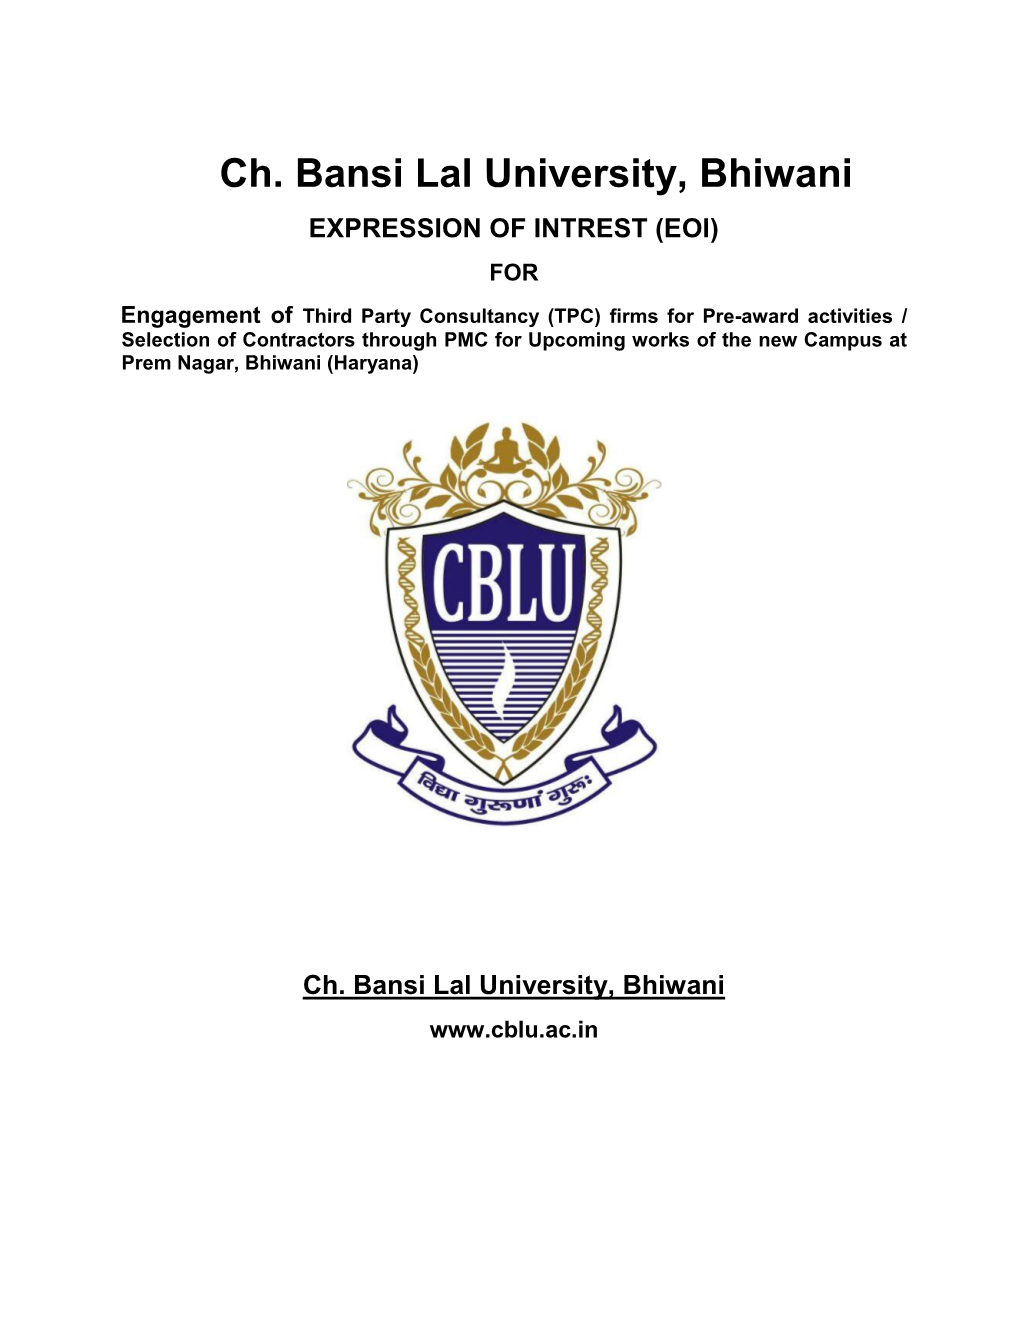 Ch. Bansi Lal University, Bhiwani EXPRESSION of INTREST (EOI) FOR